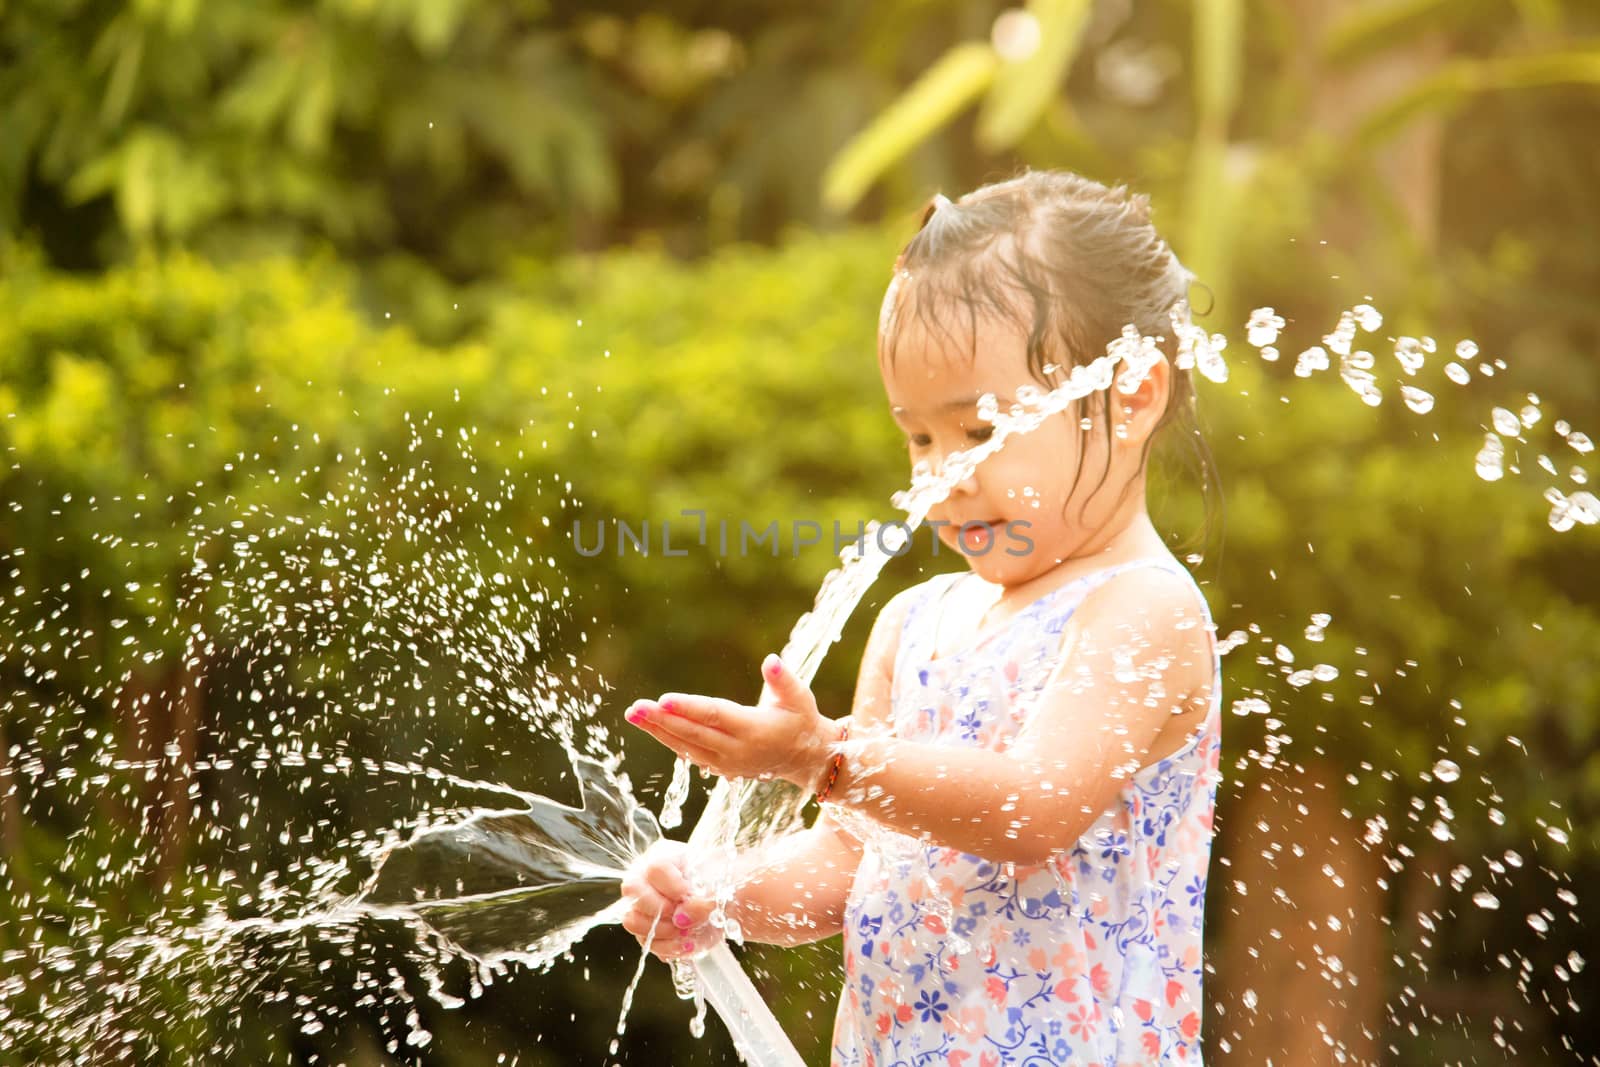 Cute little girl playing a rubber hose spraying water with sunlight in the backyard. Children enjoy outdoor activities on hot summer days.